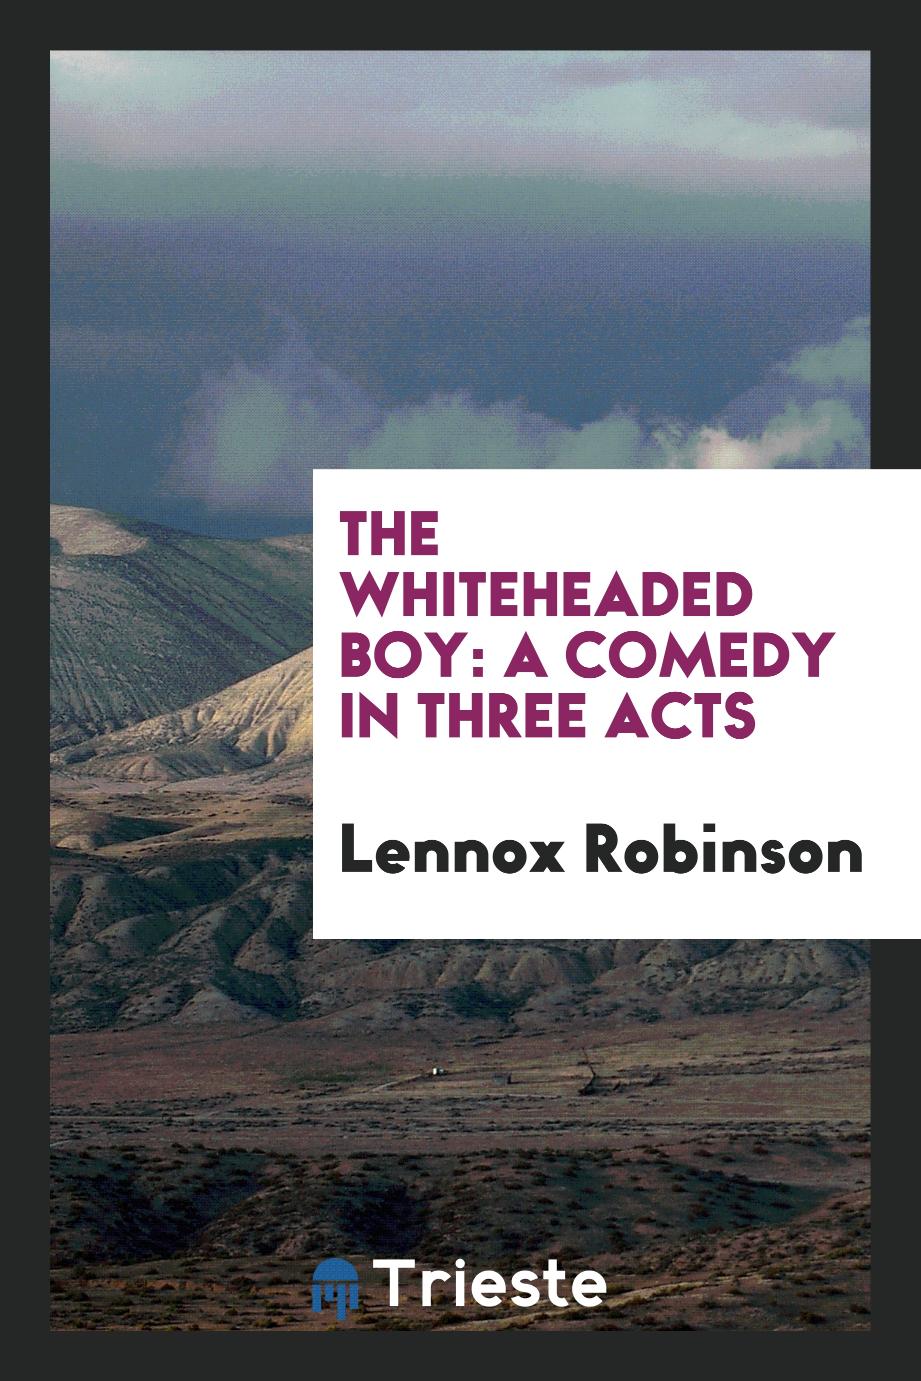 The Whiteheaded Boy: A Comedy in Three Acts